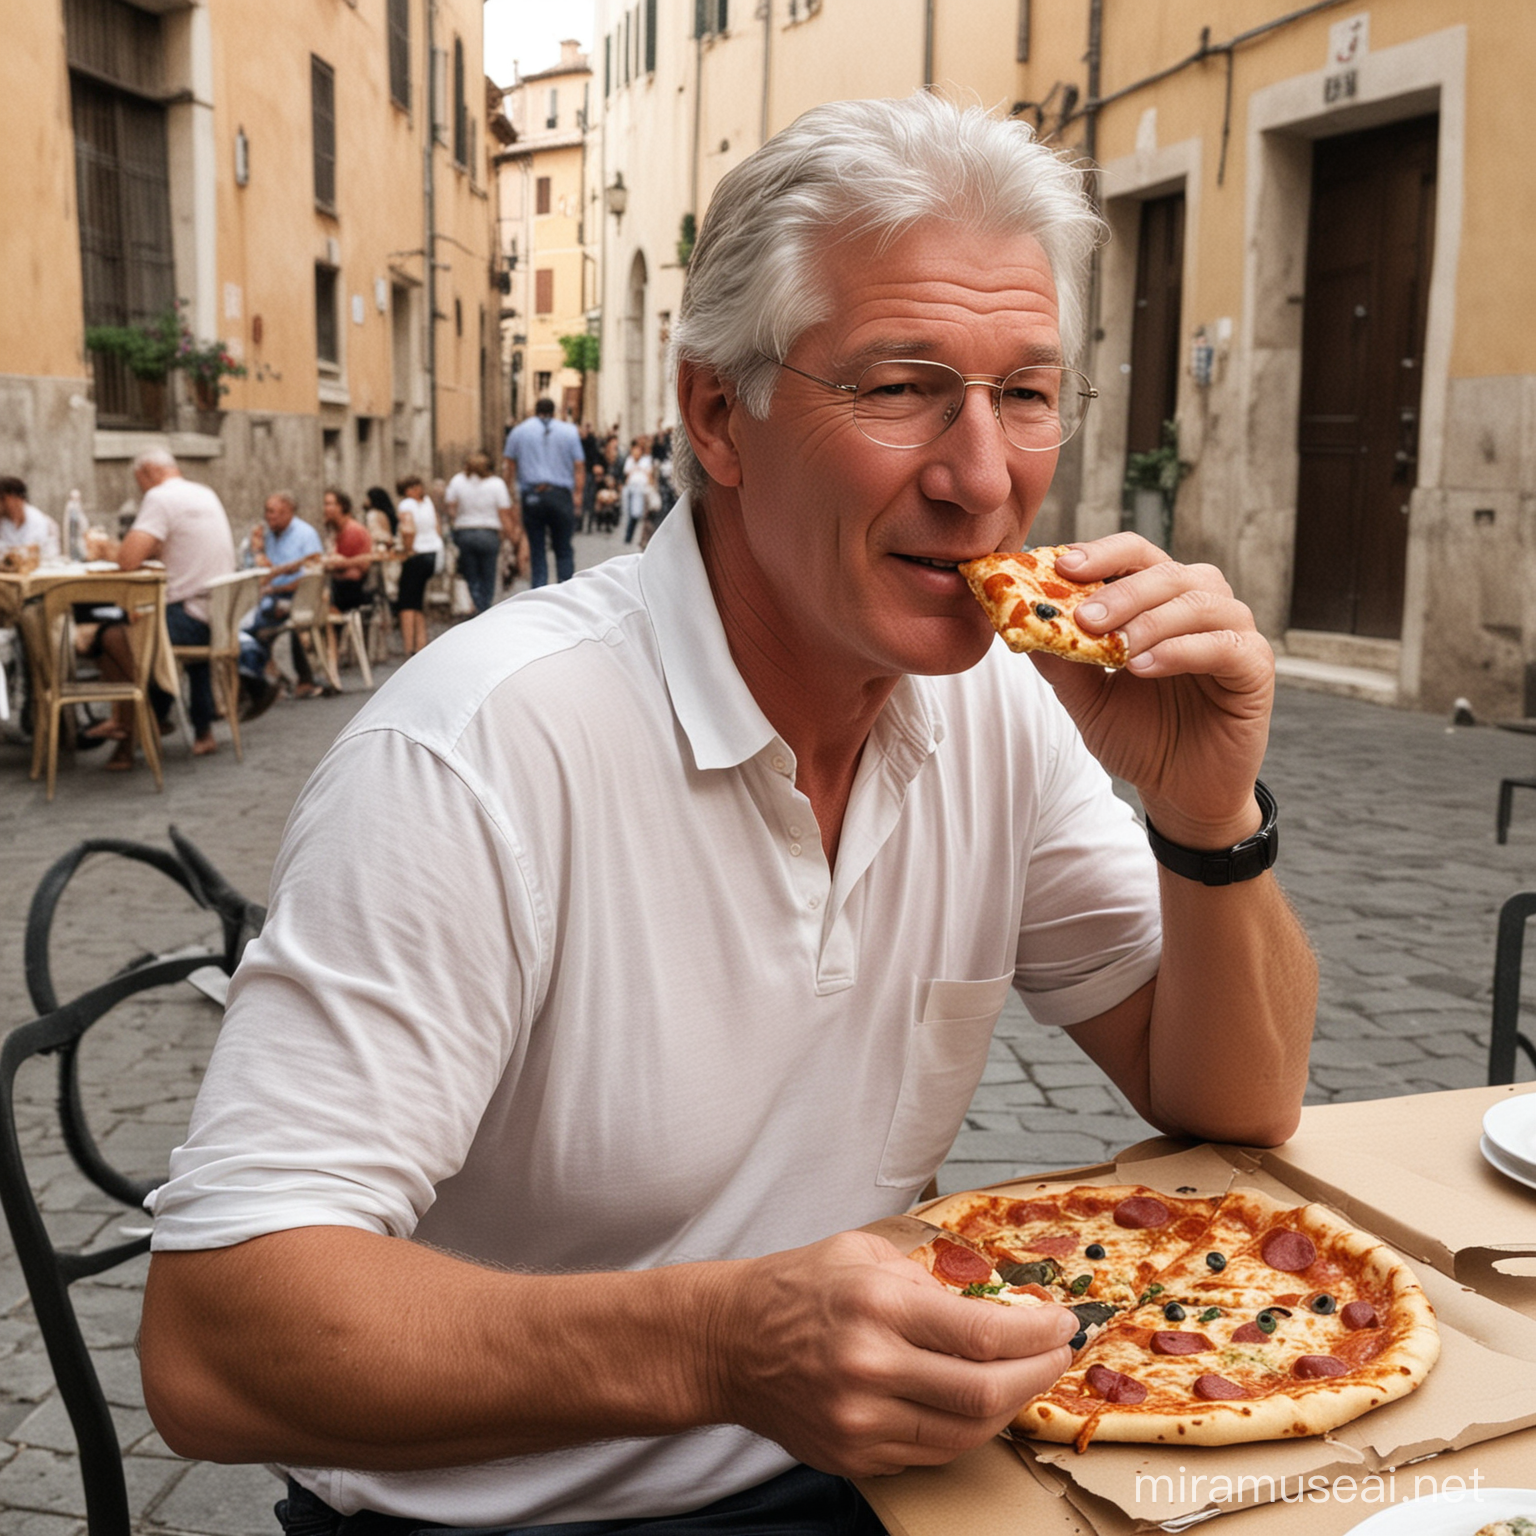 richard gere in italy, eating pizza